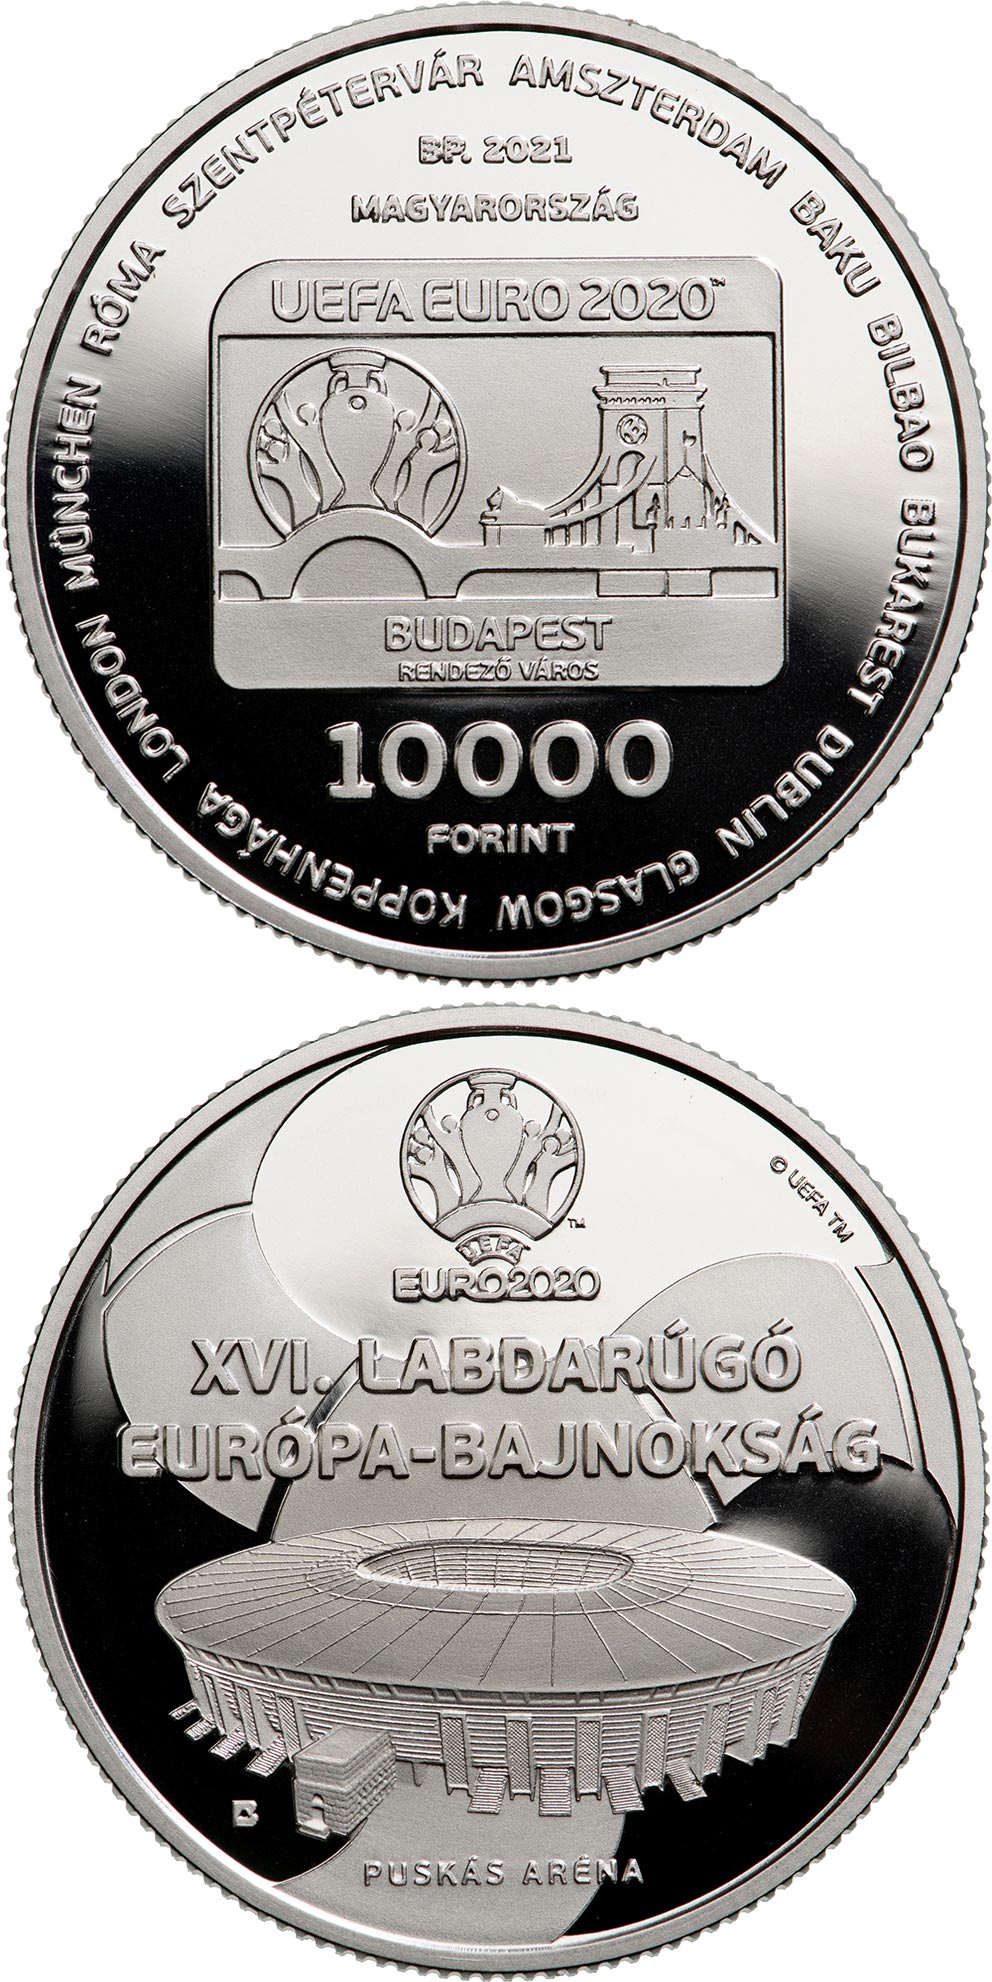 Image of 10000 forint coin - UEFA EURO 2020 | Hungary 2021.  The Silver coin is of Proof quality.